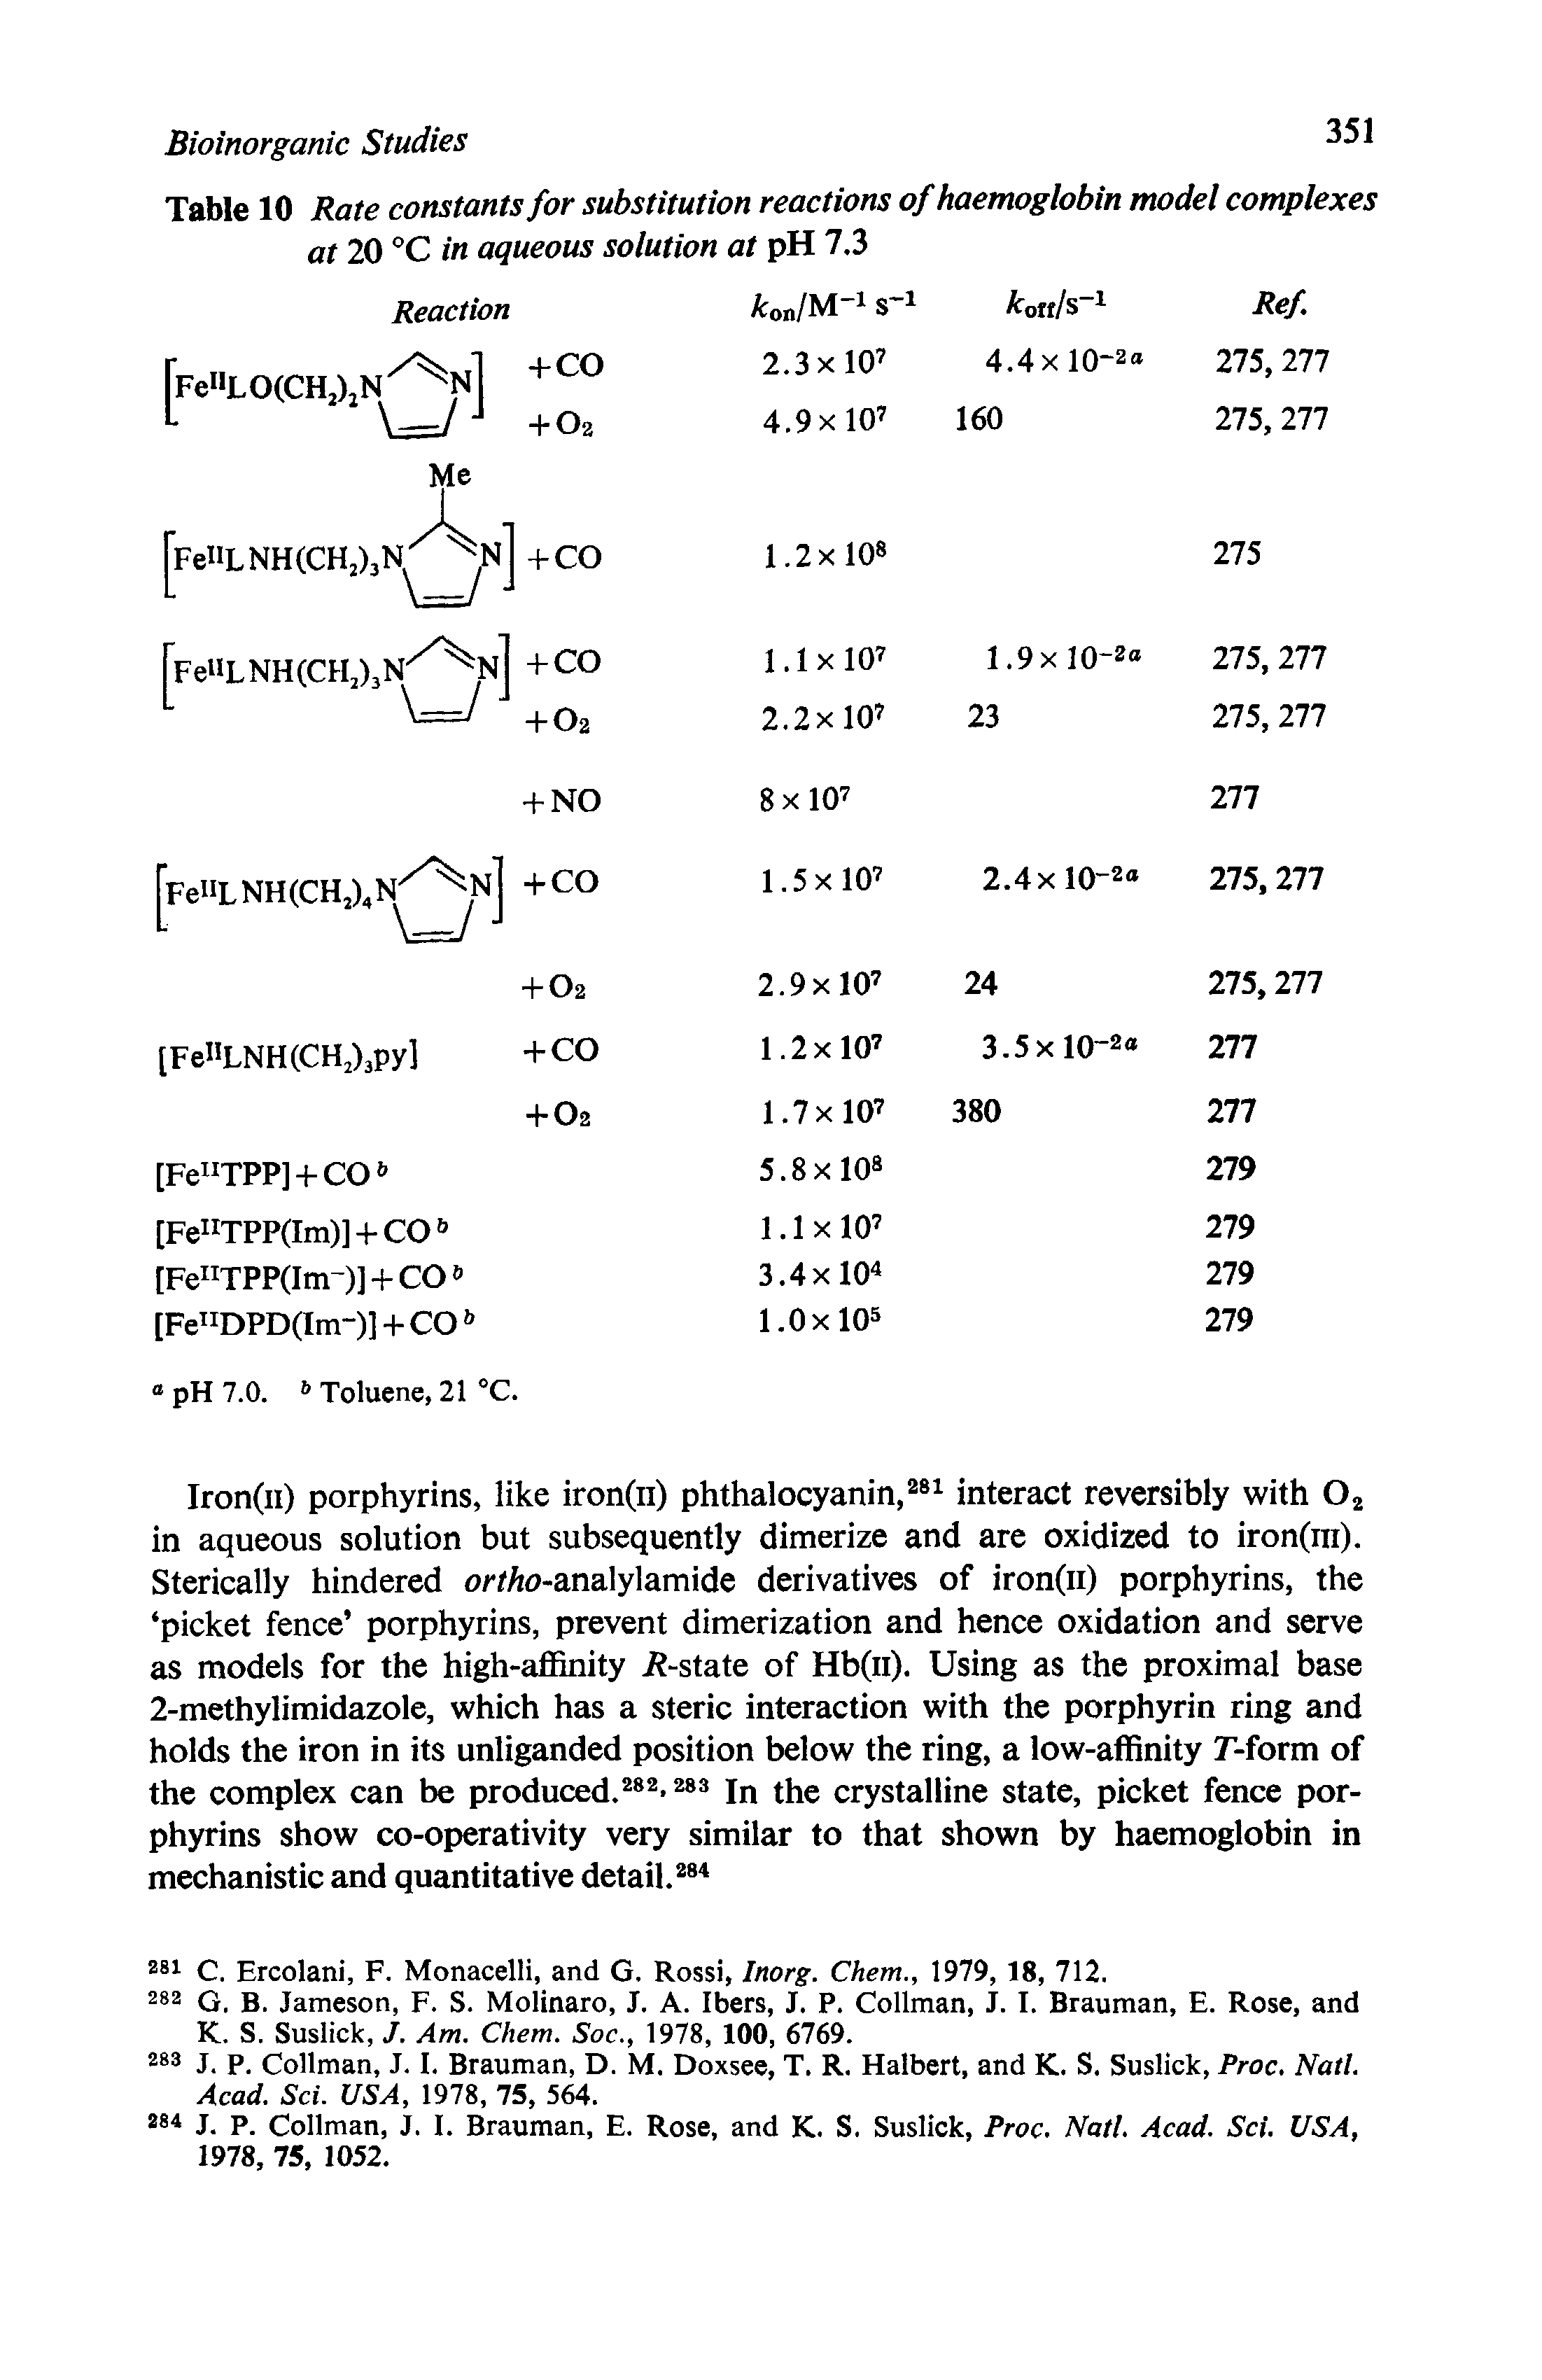 Table 10 Rate constants for substitution reactions of haemoglobin model complexes at 20 °C in aqueous solution at pH 7.3...